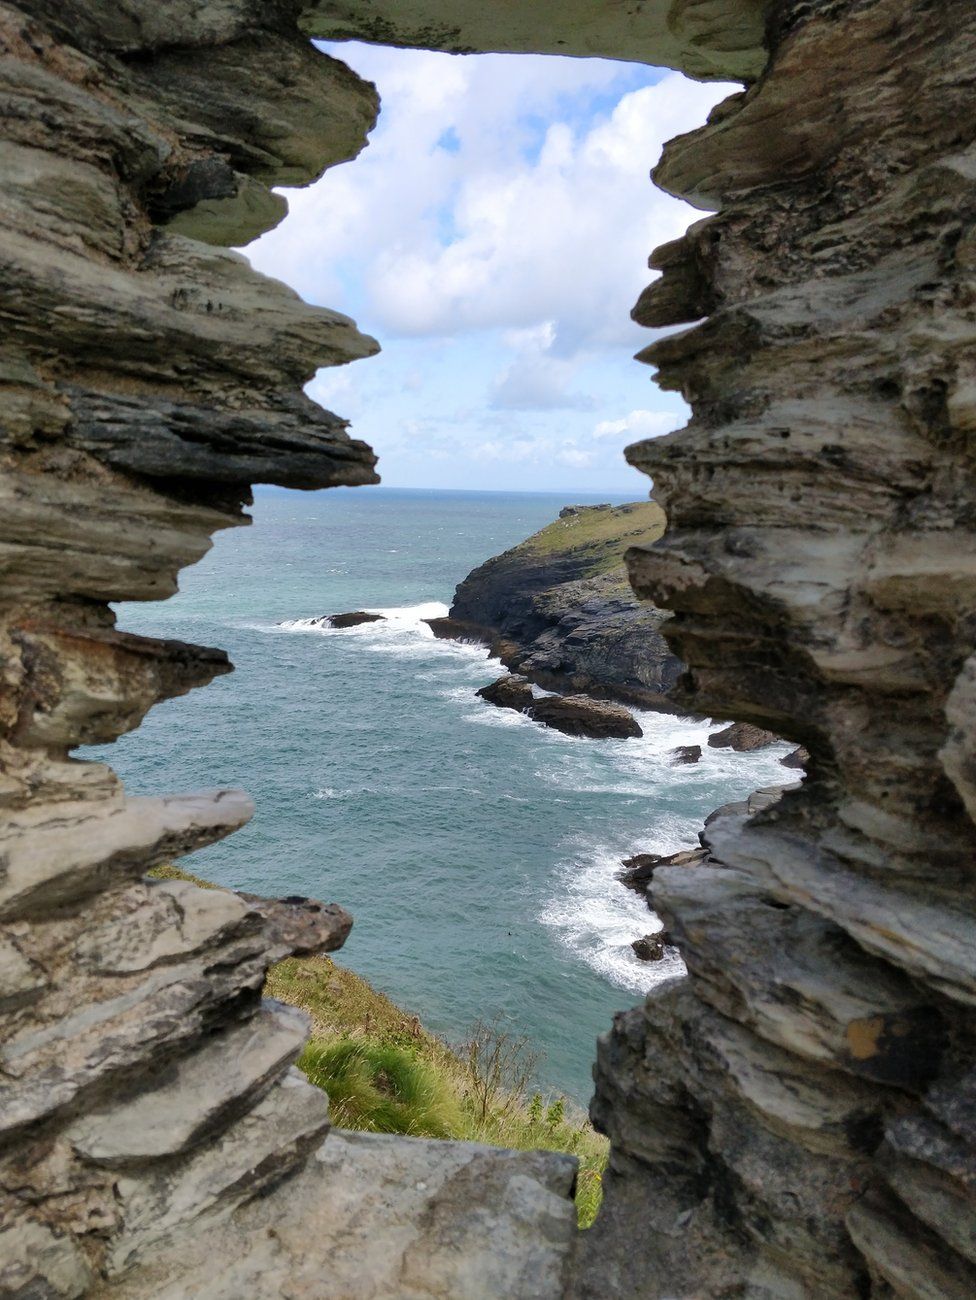 Sea and rocks viewed through a gap in rock